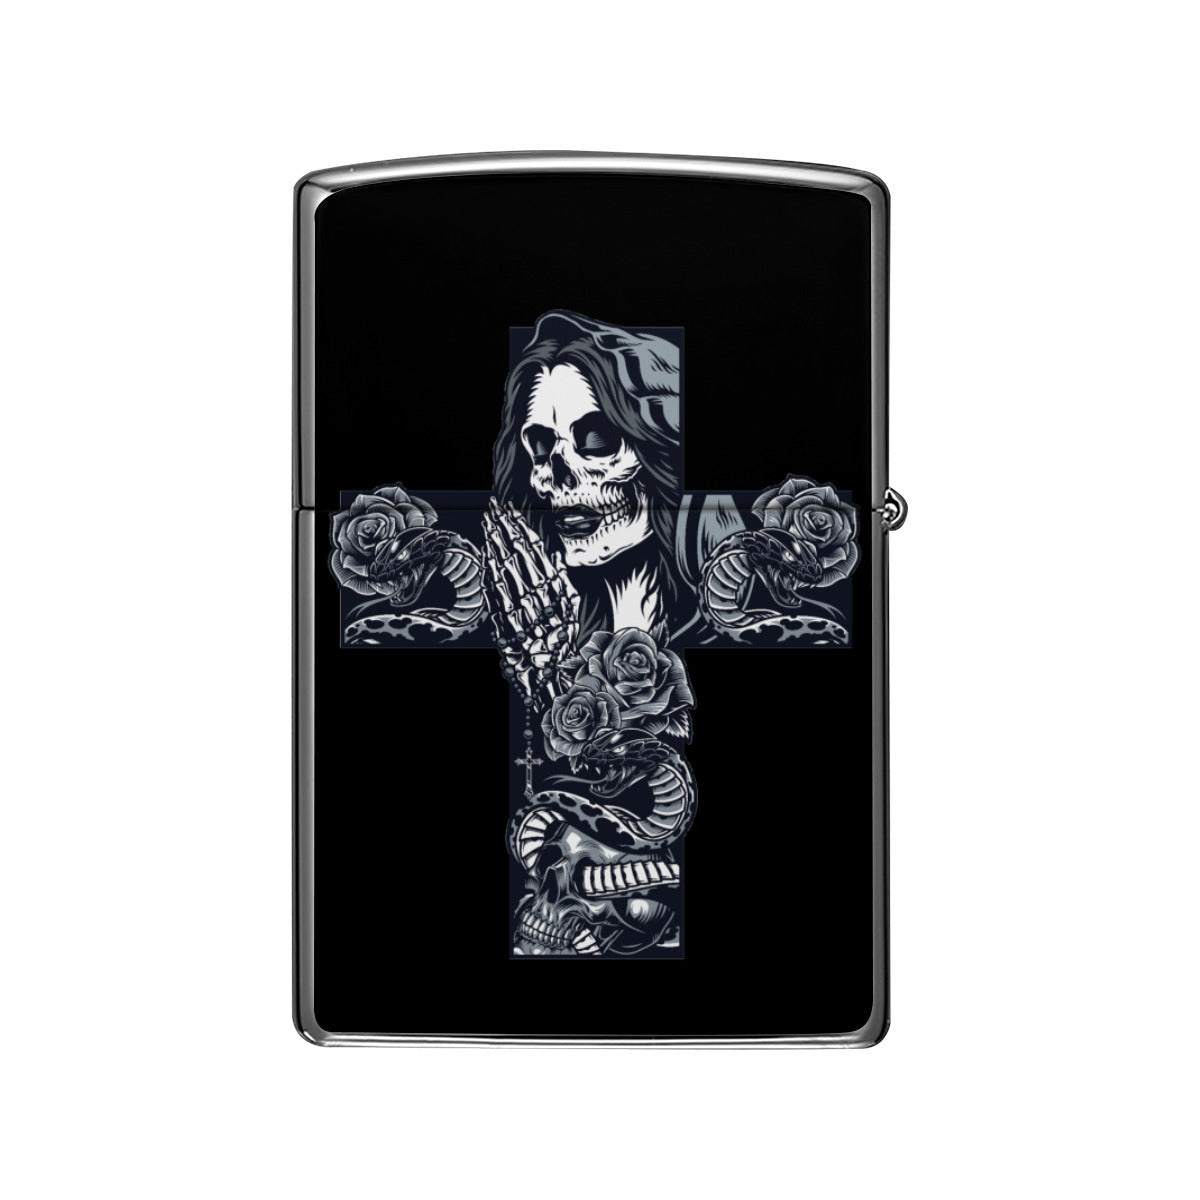 Lighter Case｜ High quality aluminum, Skull Cross Home-clothes-jewelry